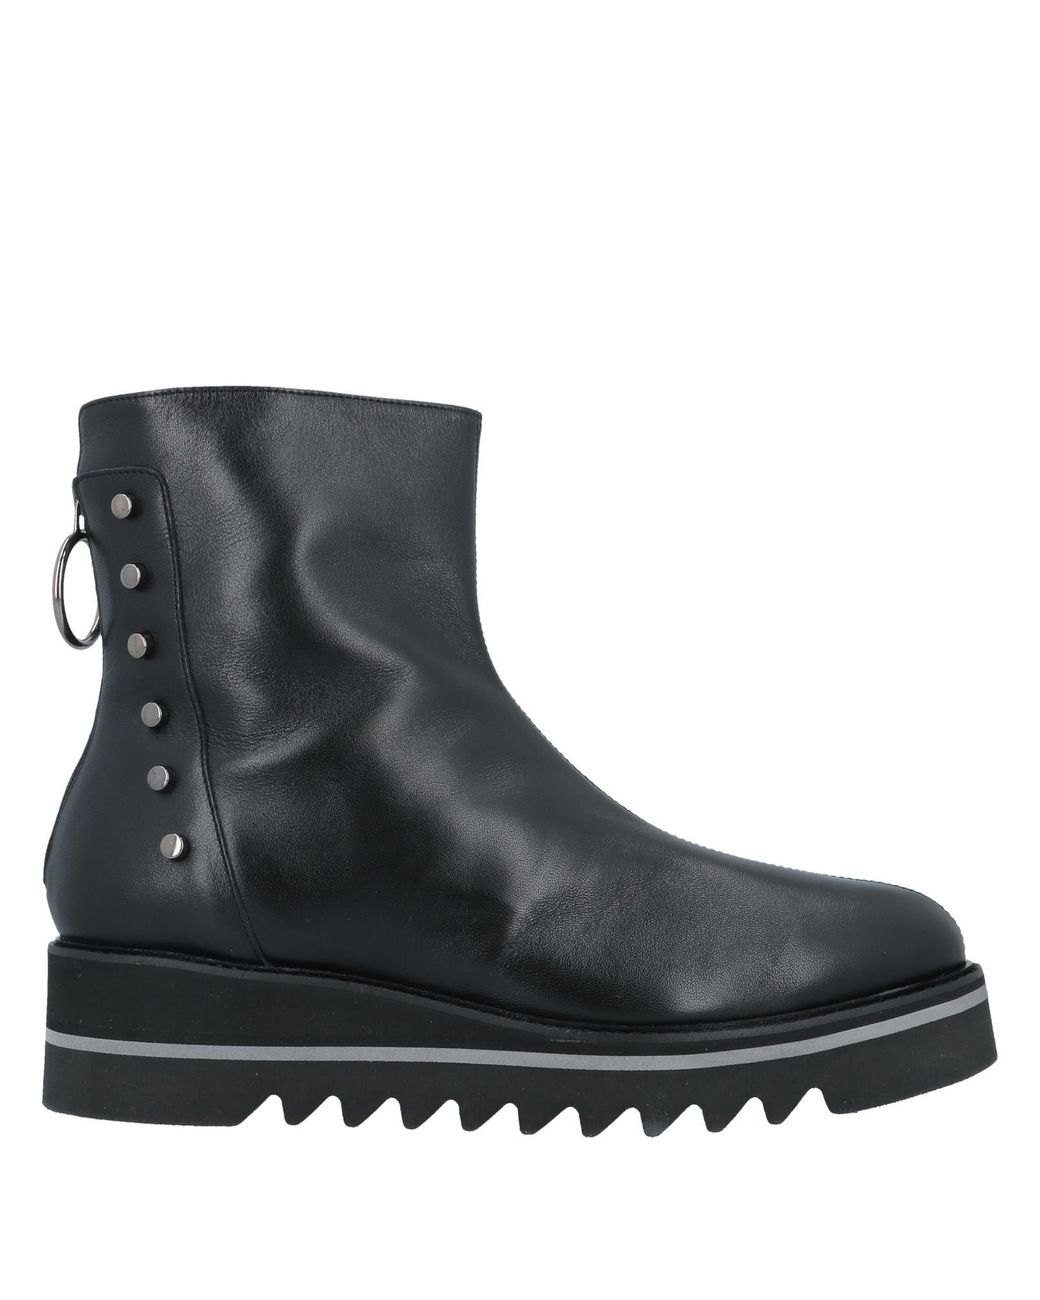 Jeannot Ankle Boots in Black - Lyst